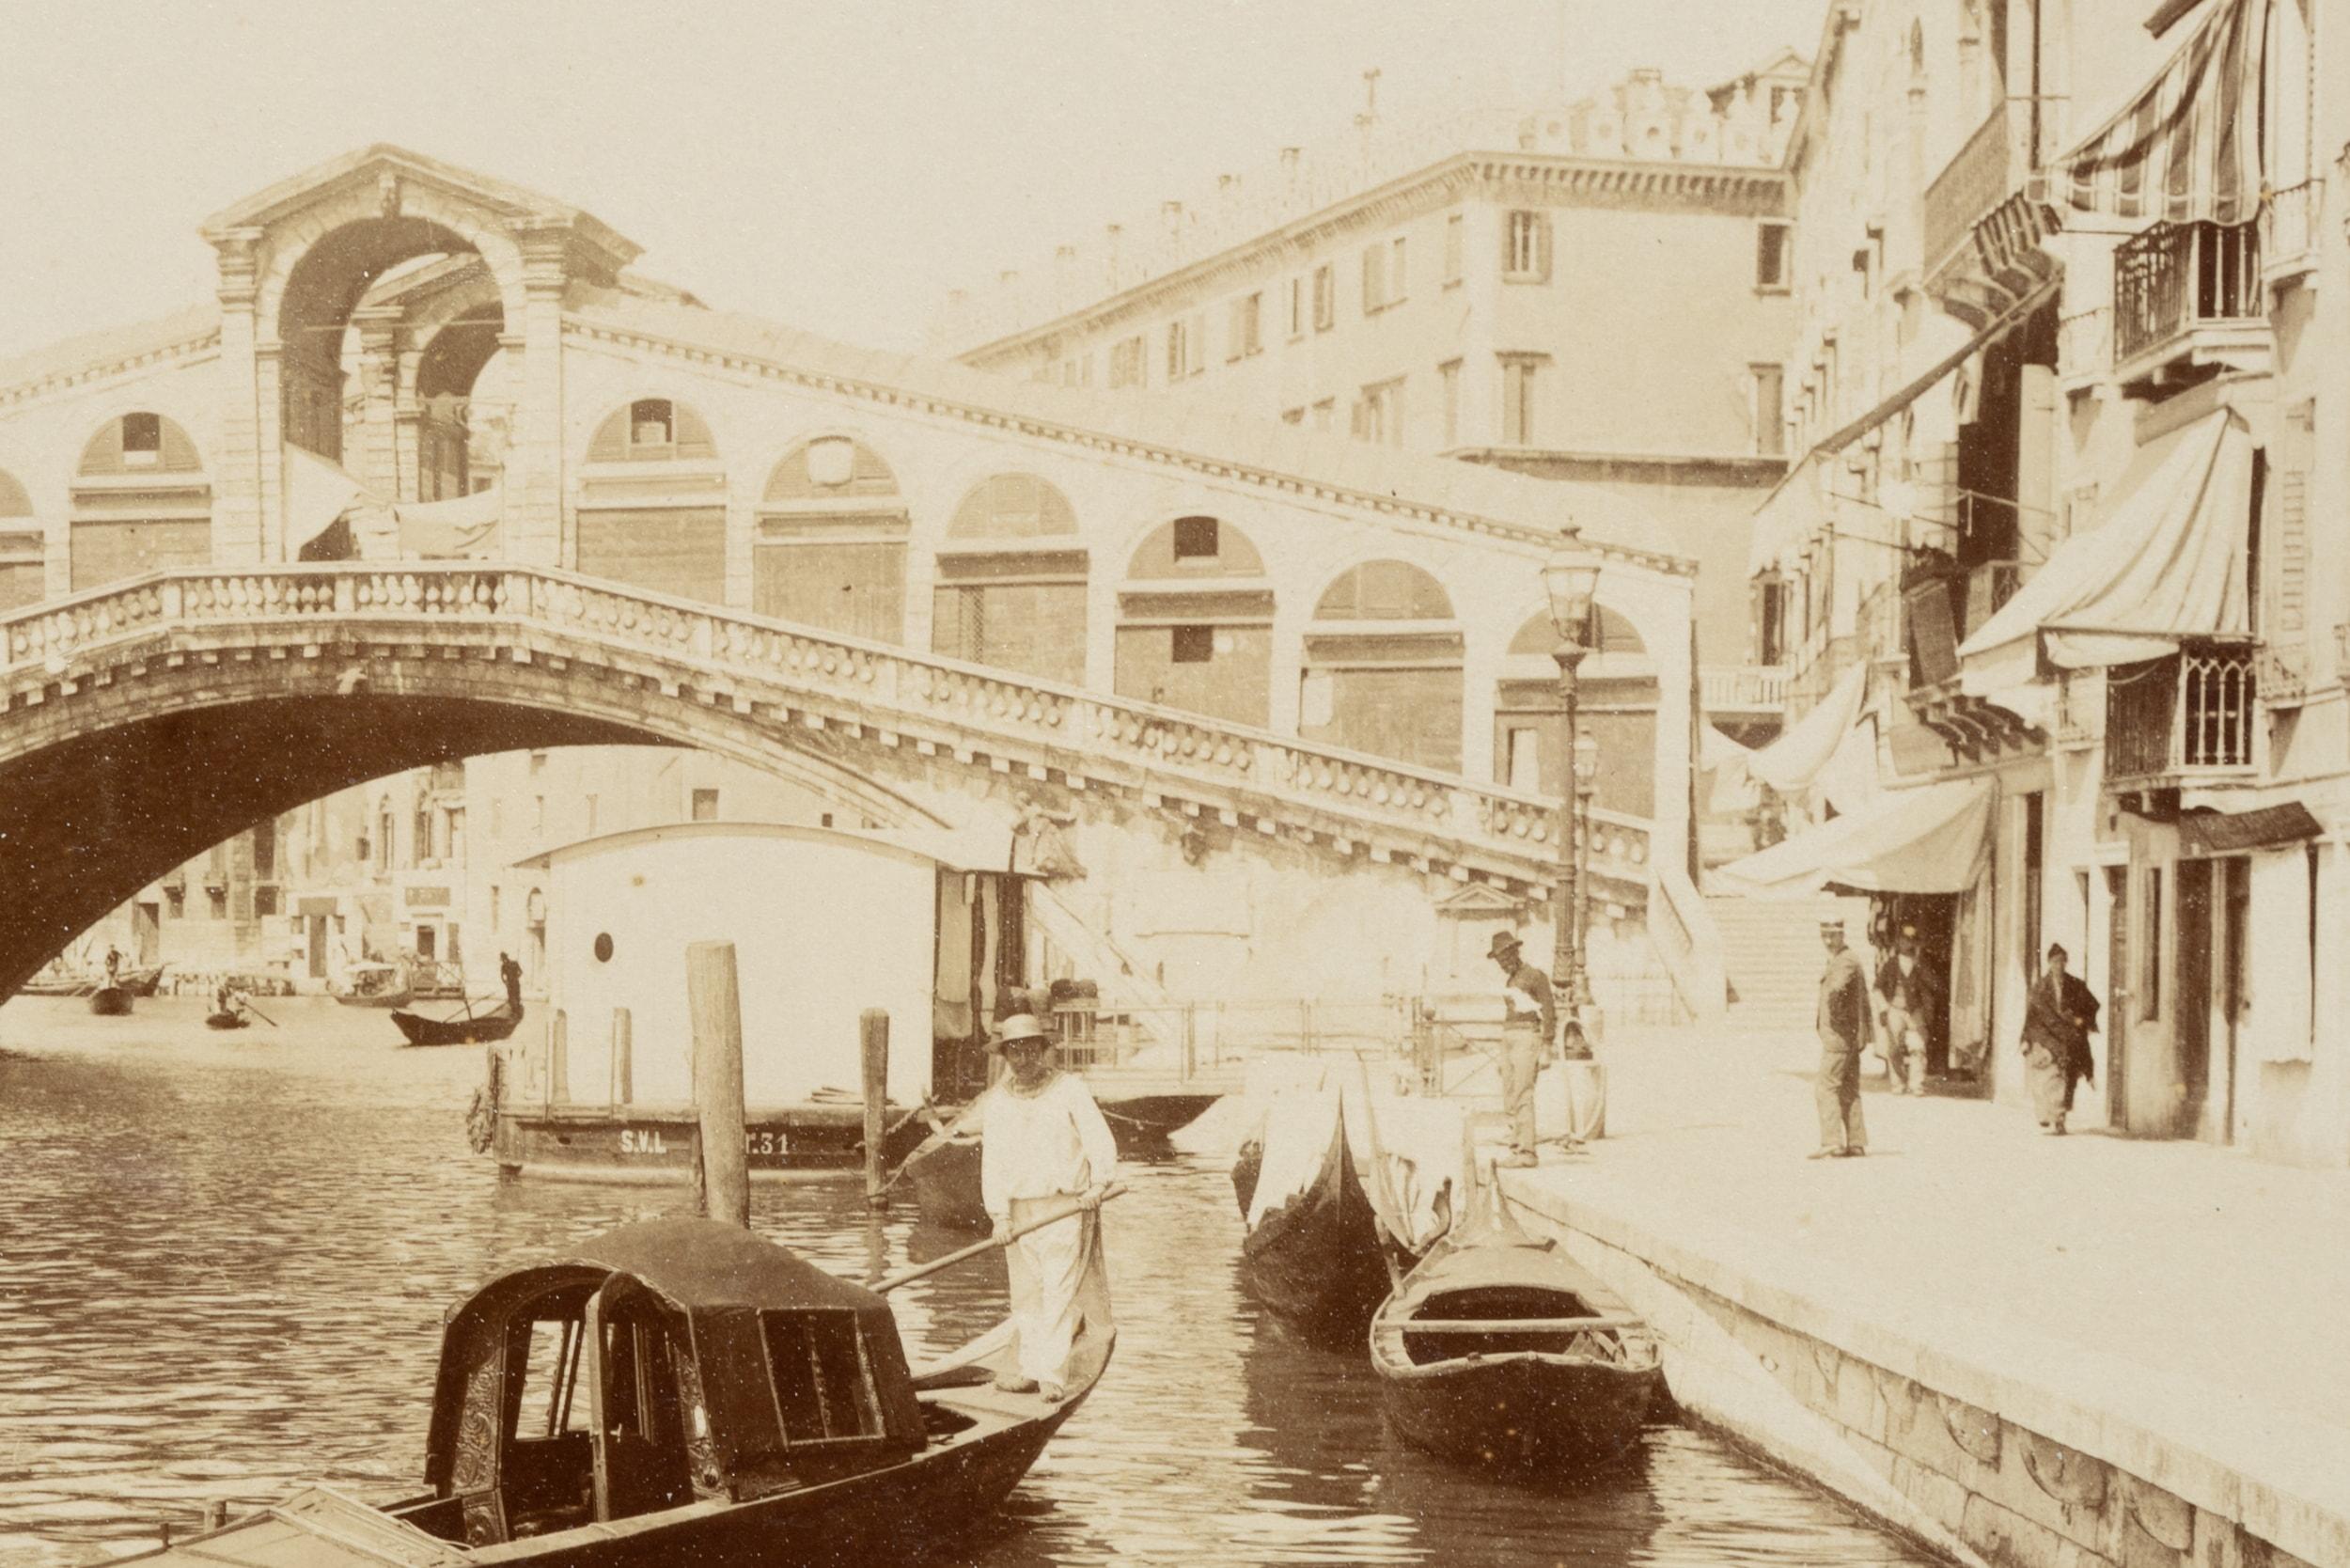 Carlo Naya (1816 Tronzano Vercellese - 1882 Venice) Circle: View across the Grand Canal to the Rialto Bridge, Venice, c. 1880, albumen paper print

Technique: albumen paper print, mounted on Cardboard

Inscription: Lower middle inscribed on the